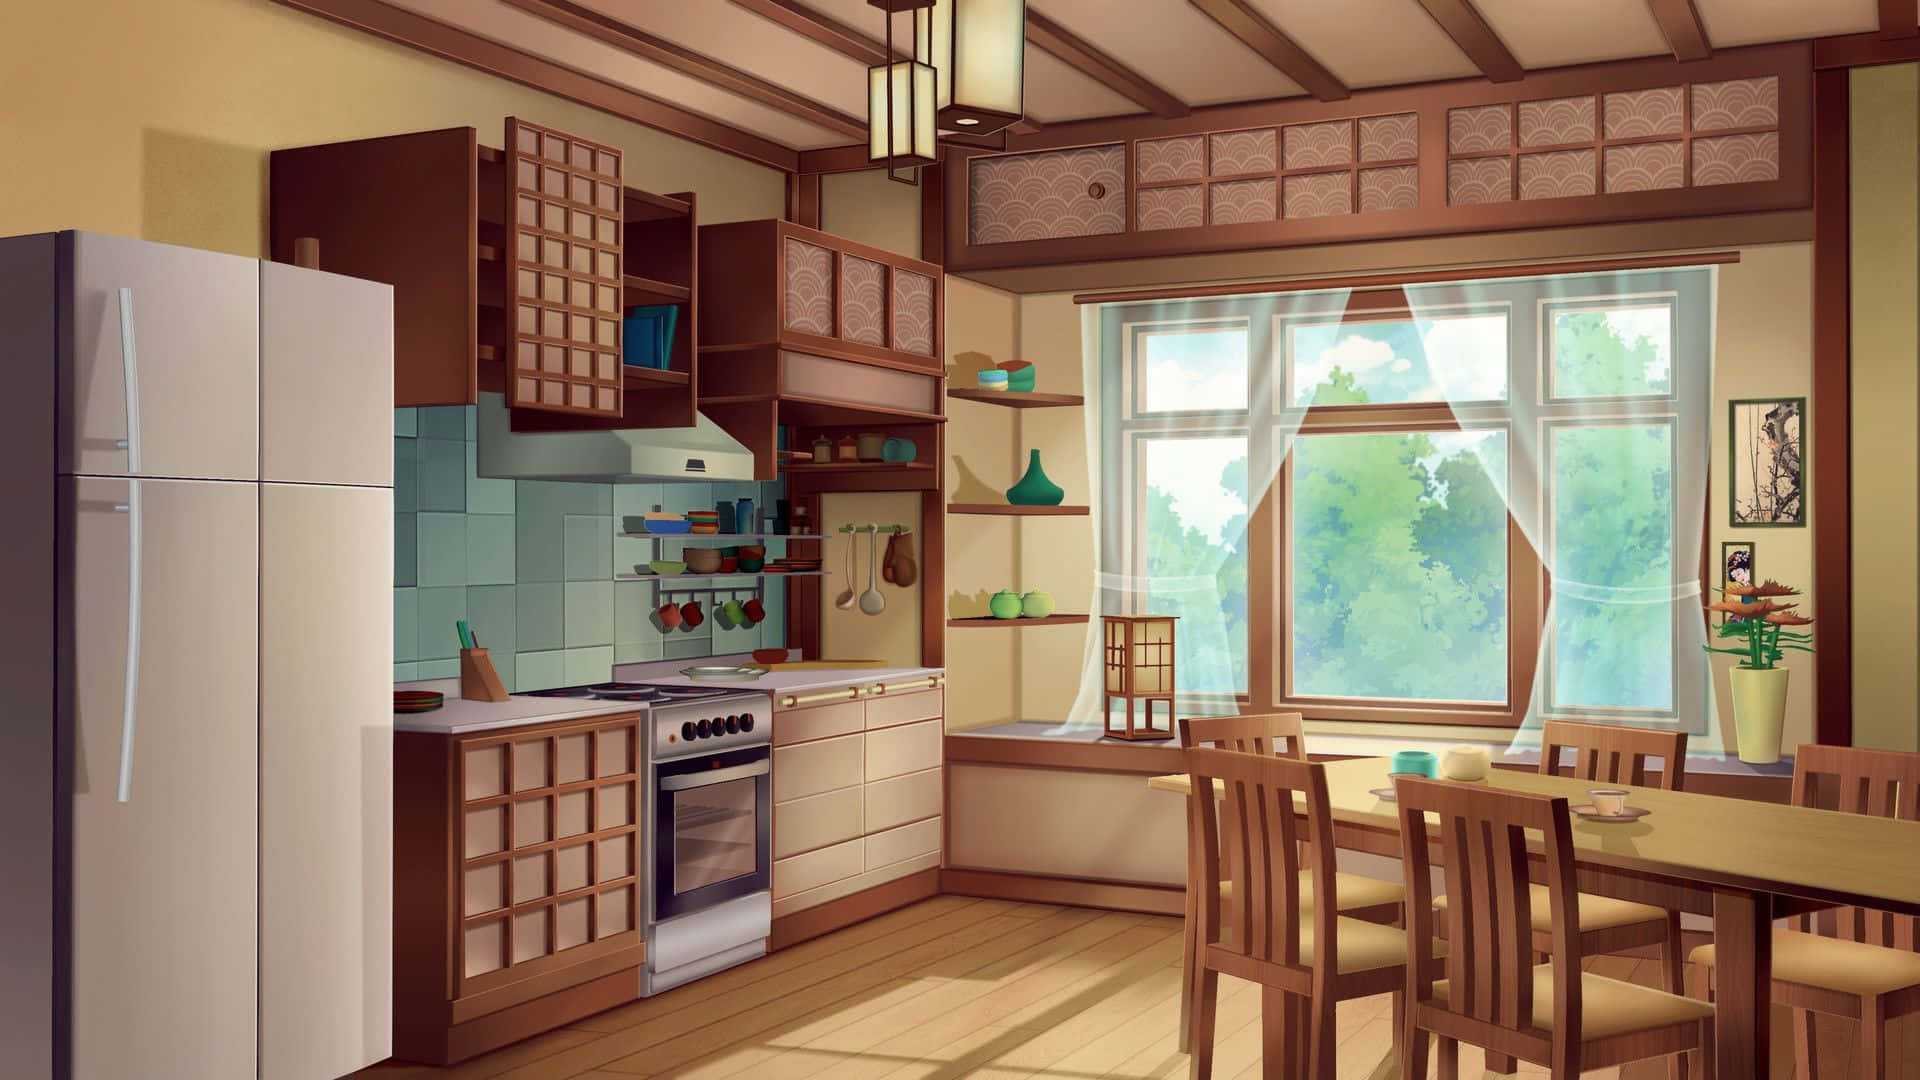 1920x1080 Traditional Japanese Kitchen Background